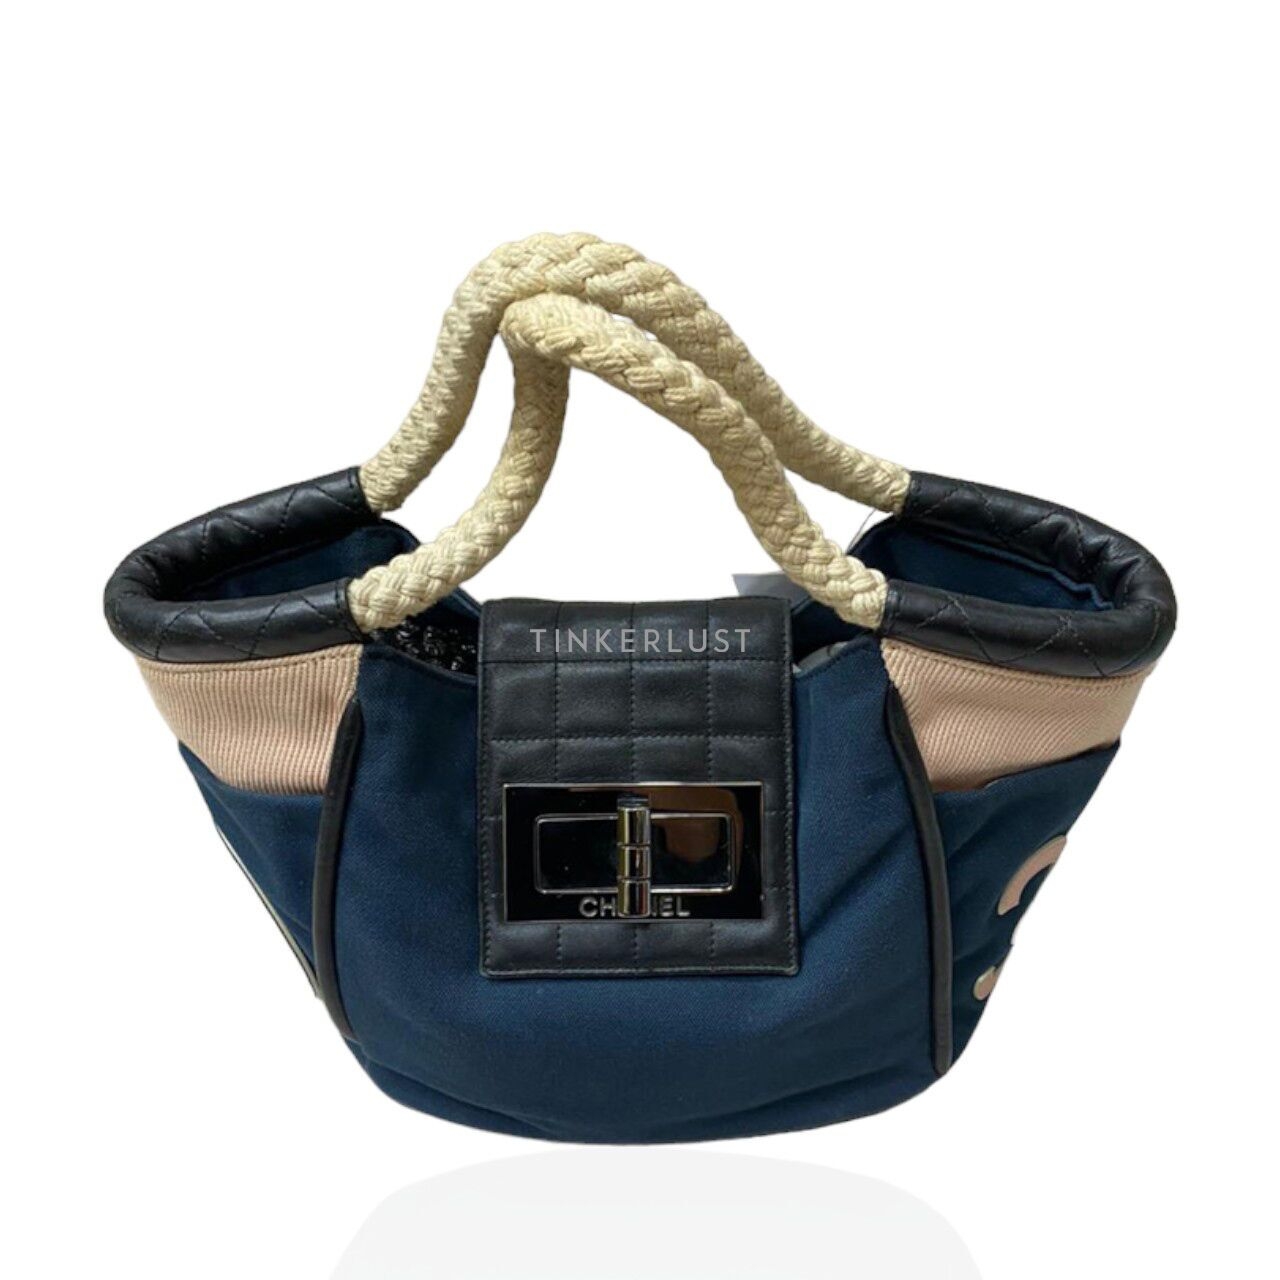 Chanel Vintage Reissue Navy #9 SHW Tote Bag